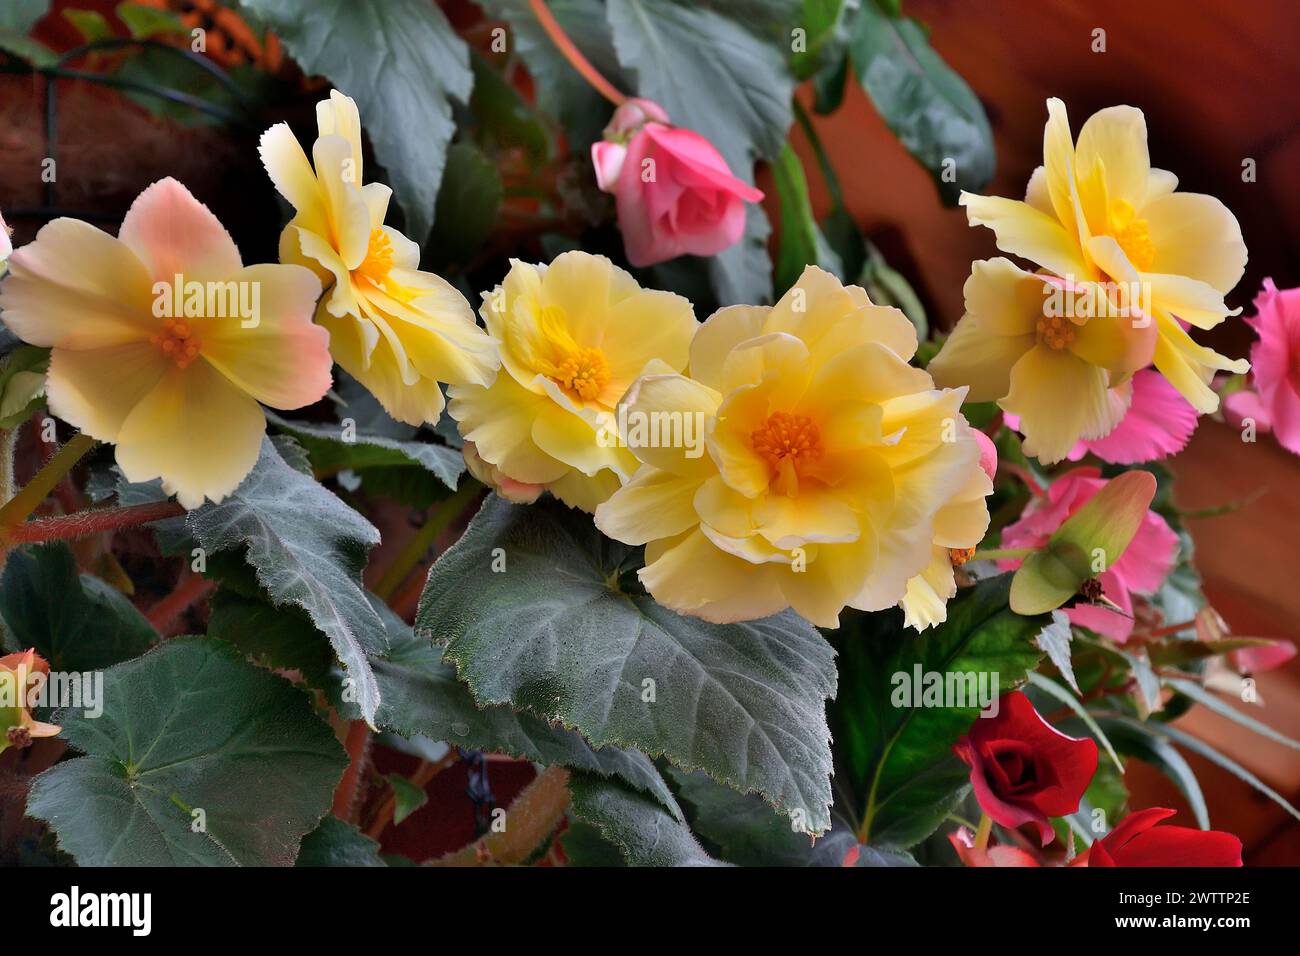 Delicate yellow with pink tint tuberous begonia double flowers. Flowering perennial potted houseplant with beautiful flowers. Floricultureor gardening Stock Photo